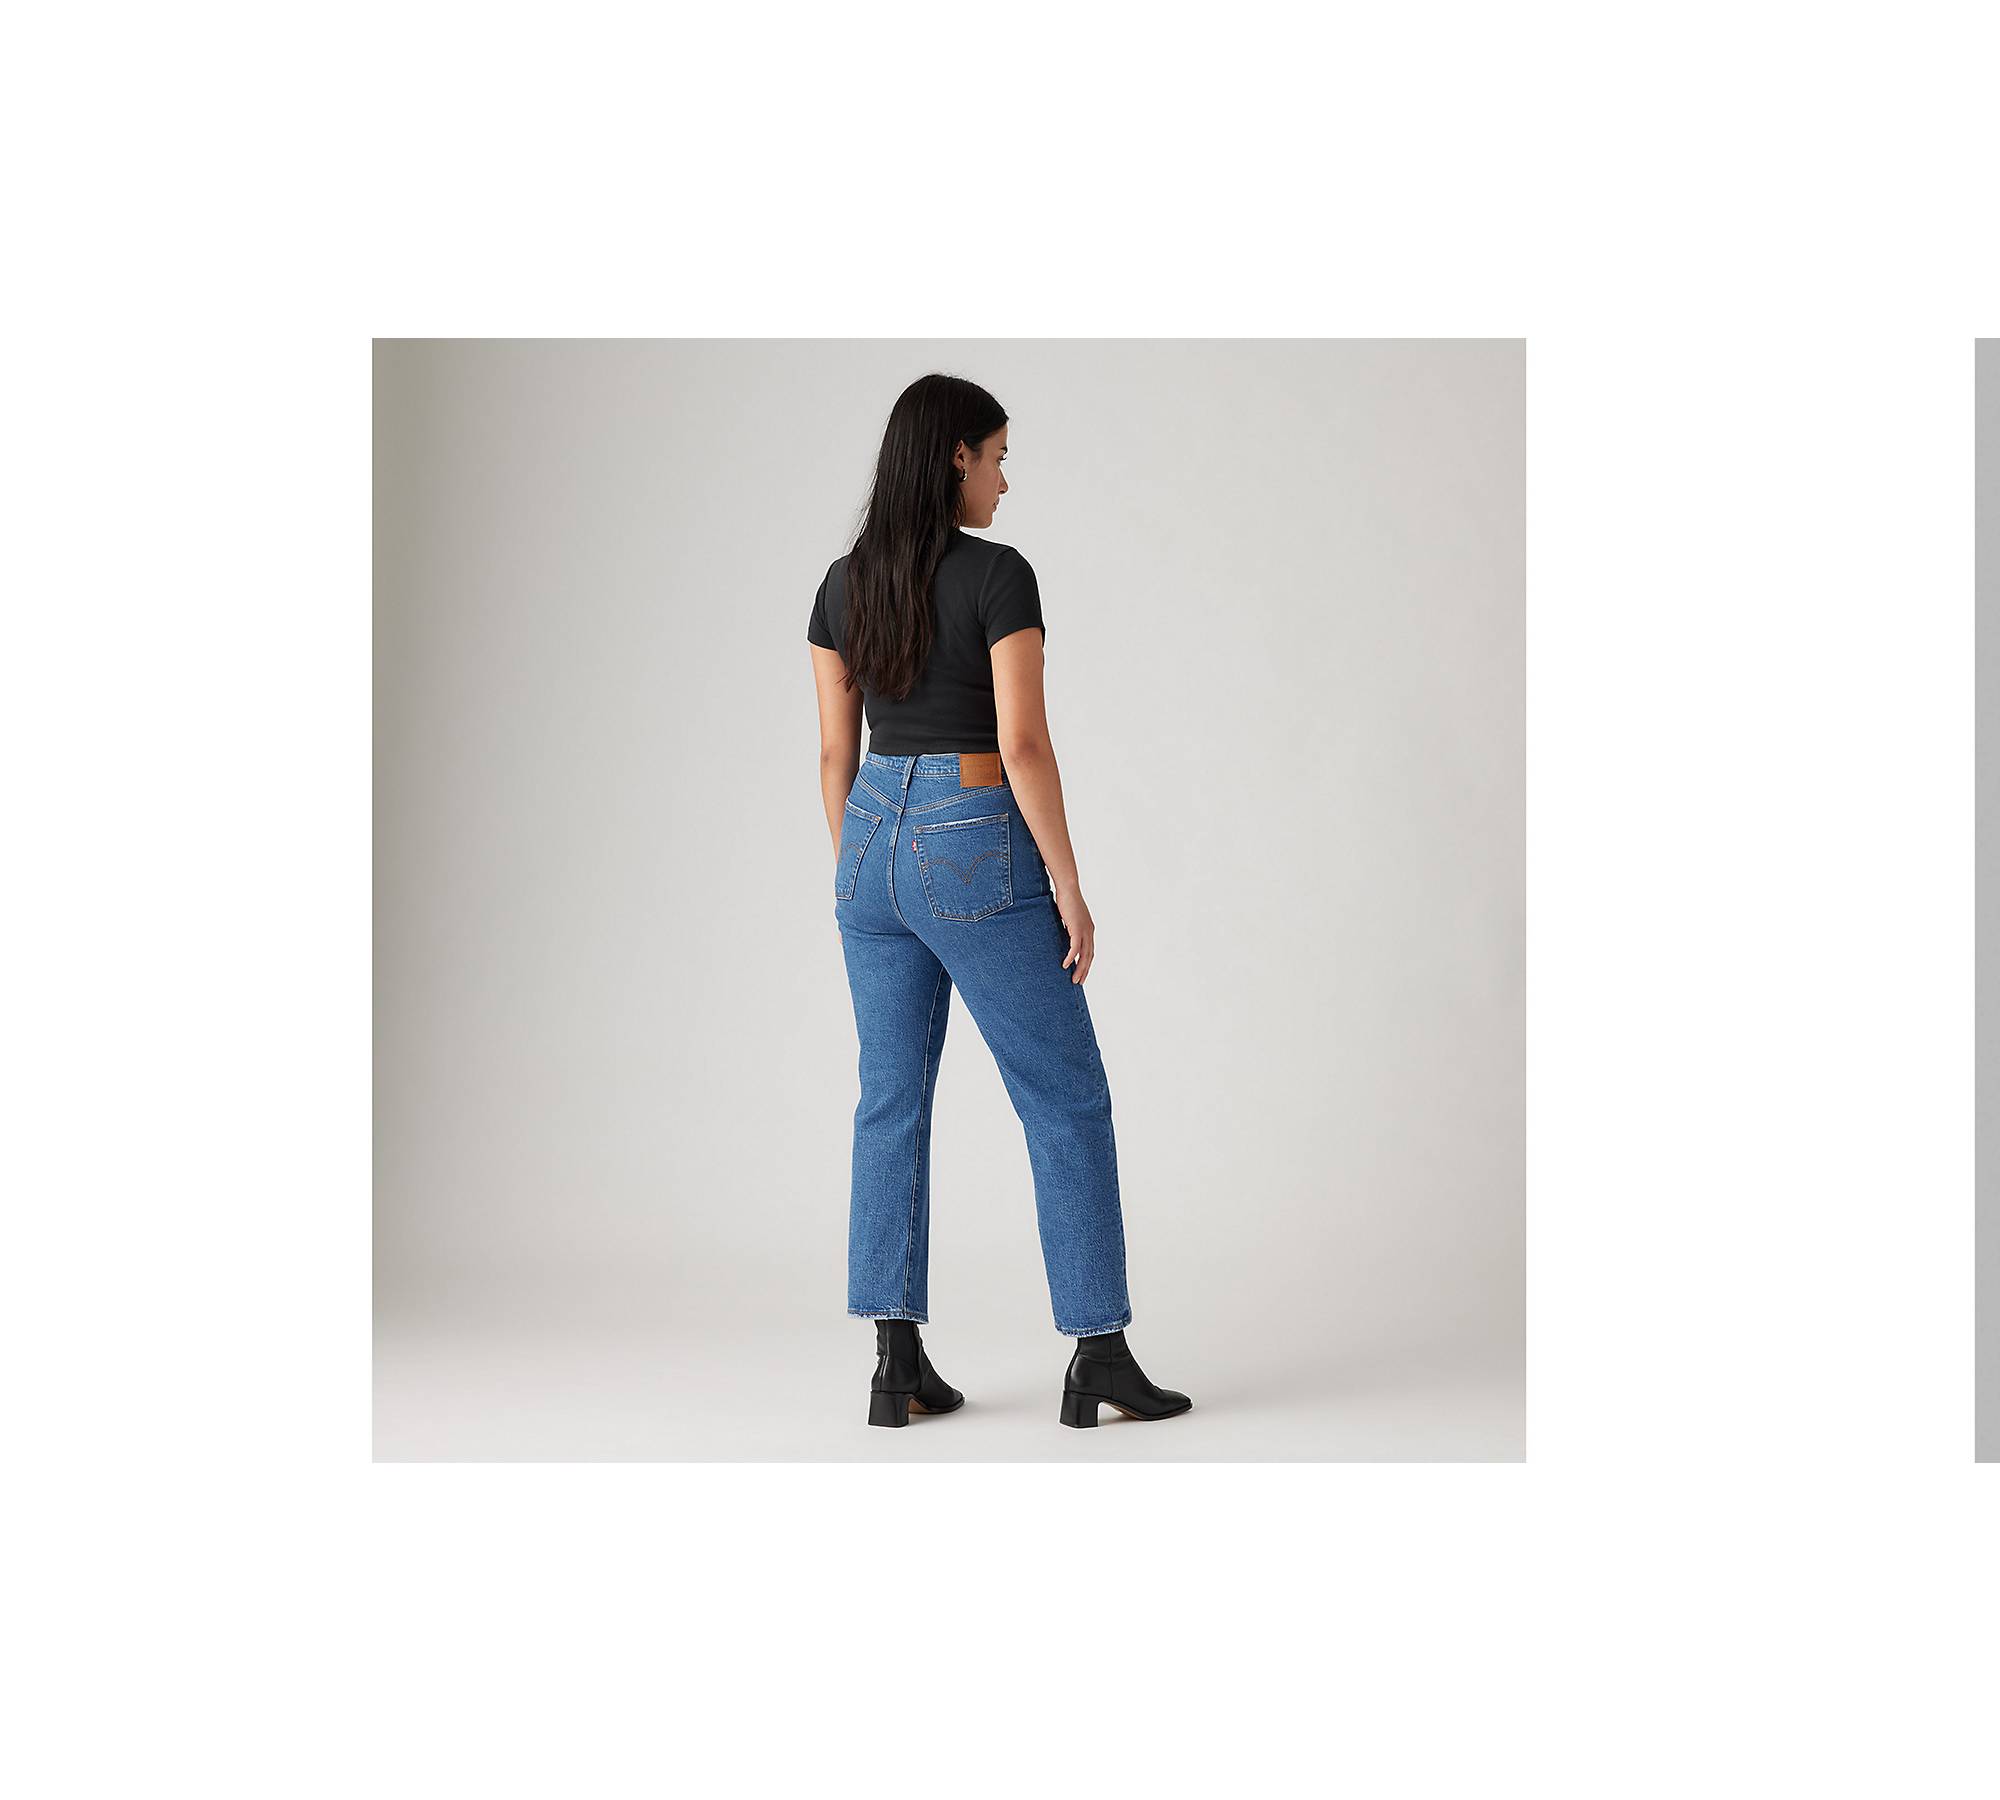 Levi's, Jeans, Levis High Waisted Taper Jeans